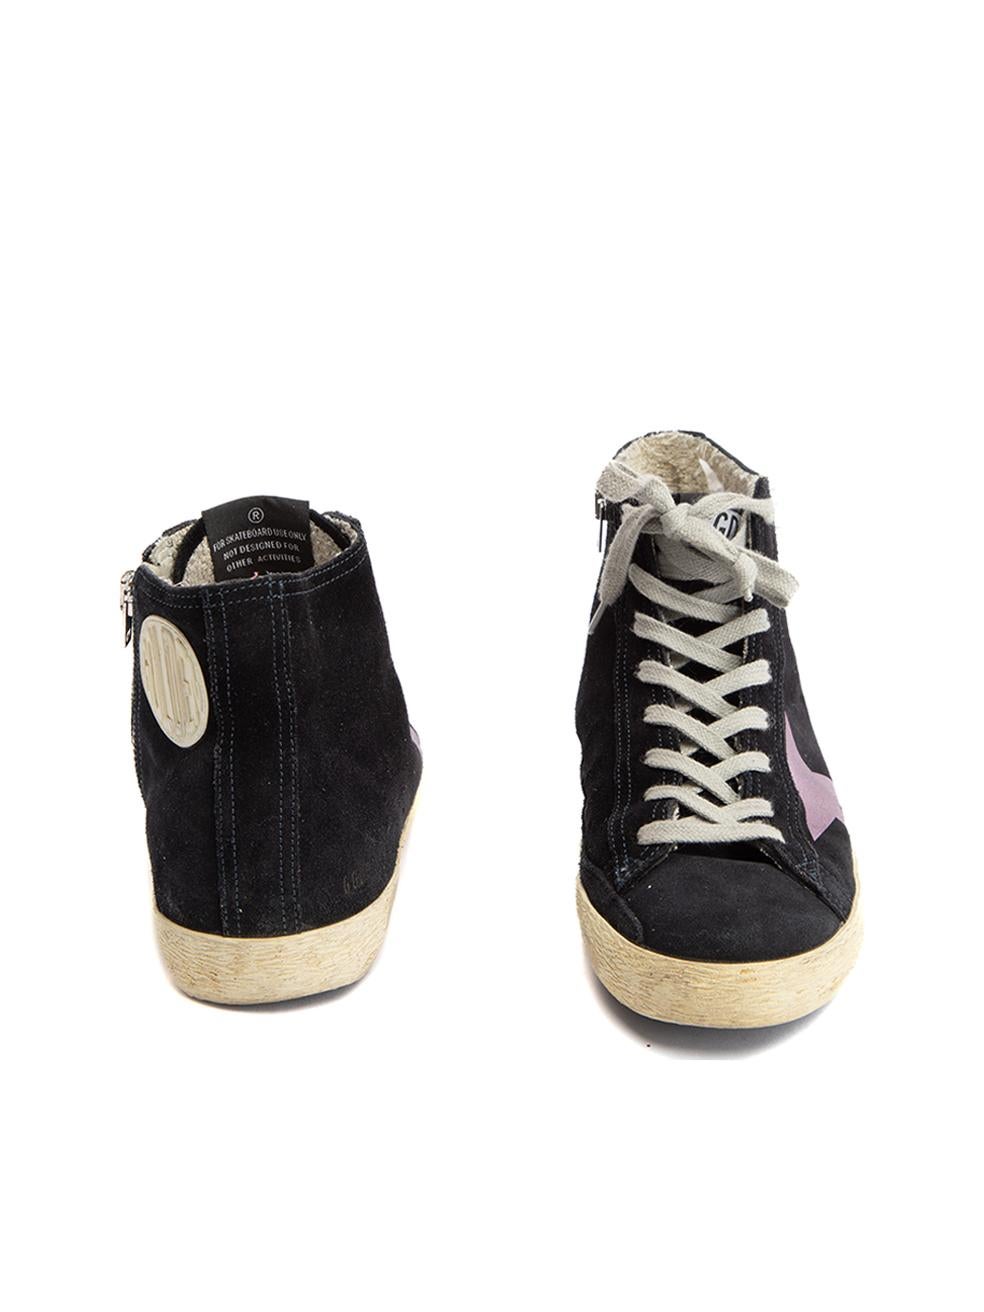 Golden Goose Women's Black Suede Francy High Top Trainers In Excellent Condition For Sale In London, GB